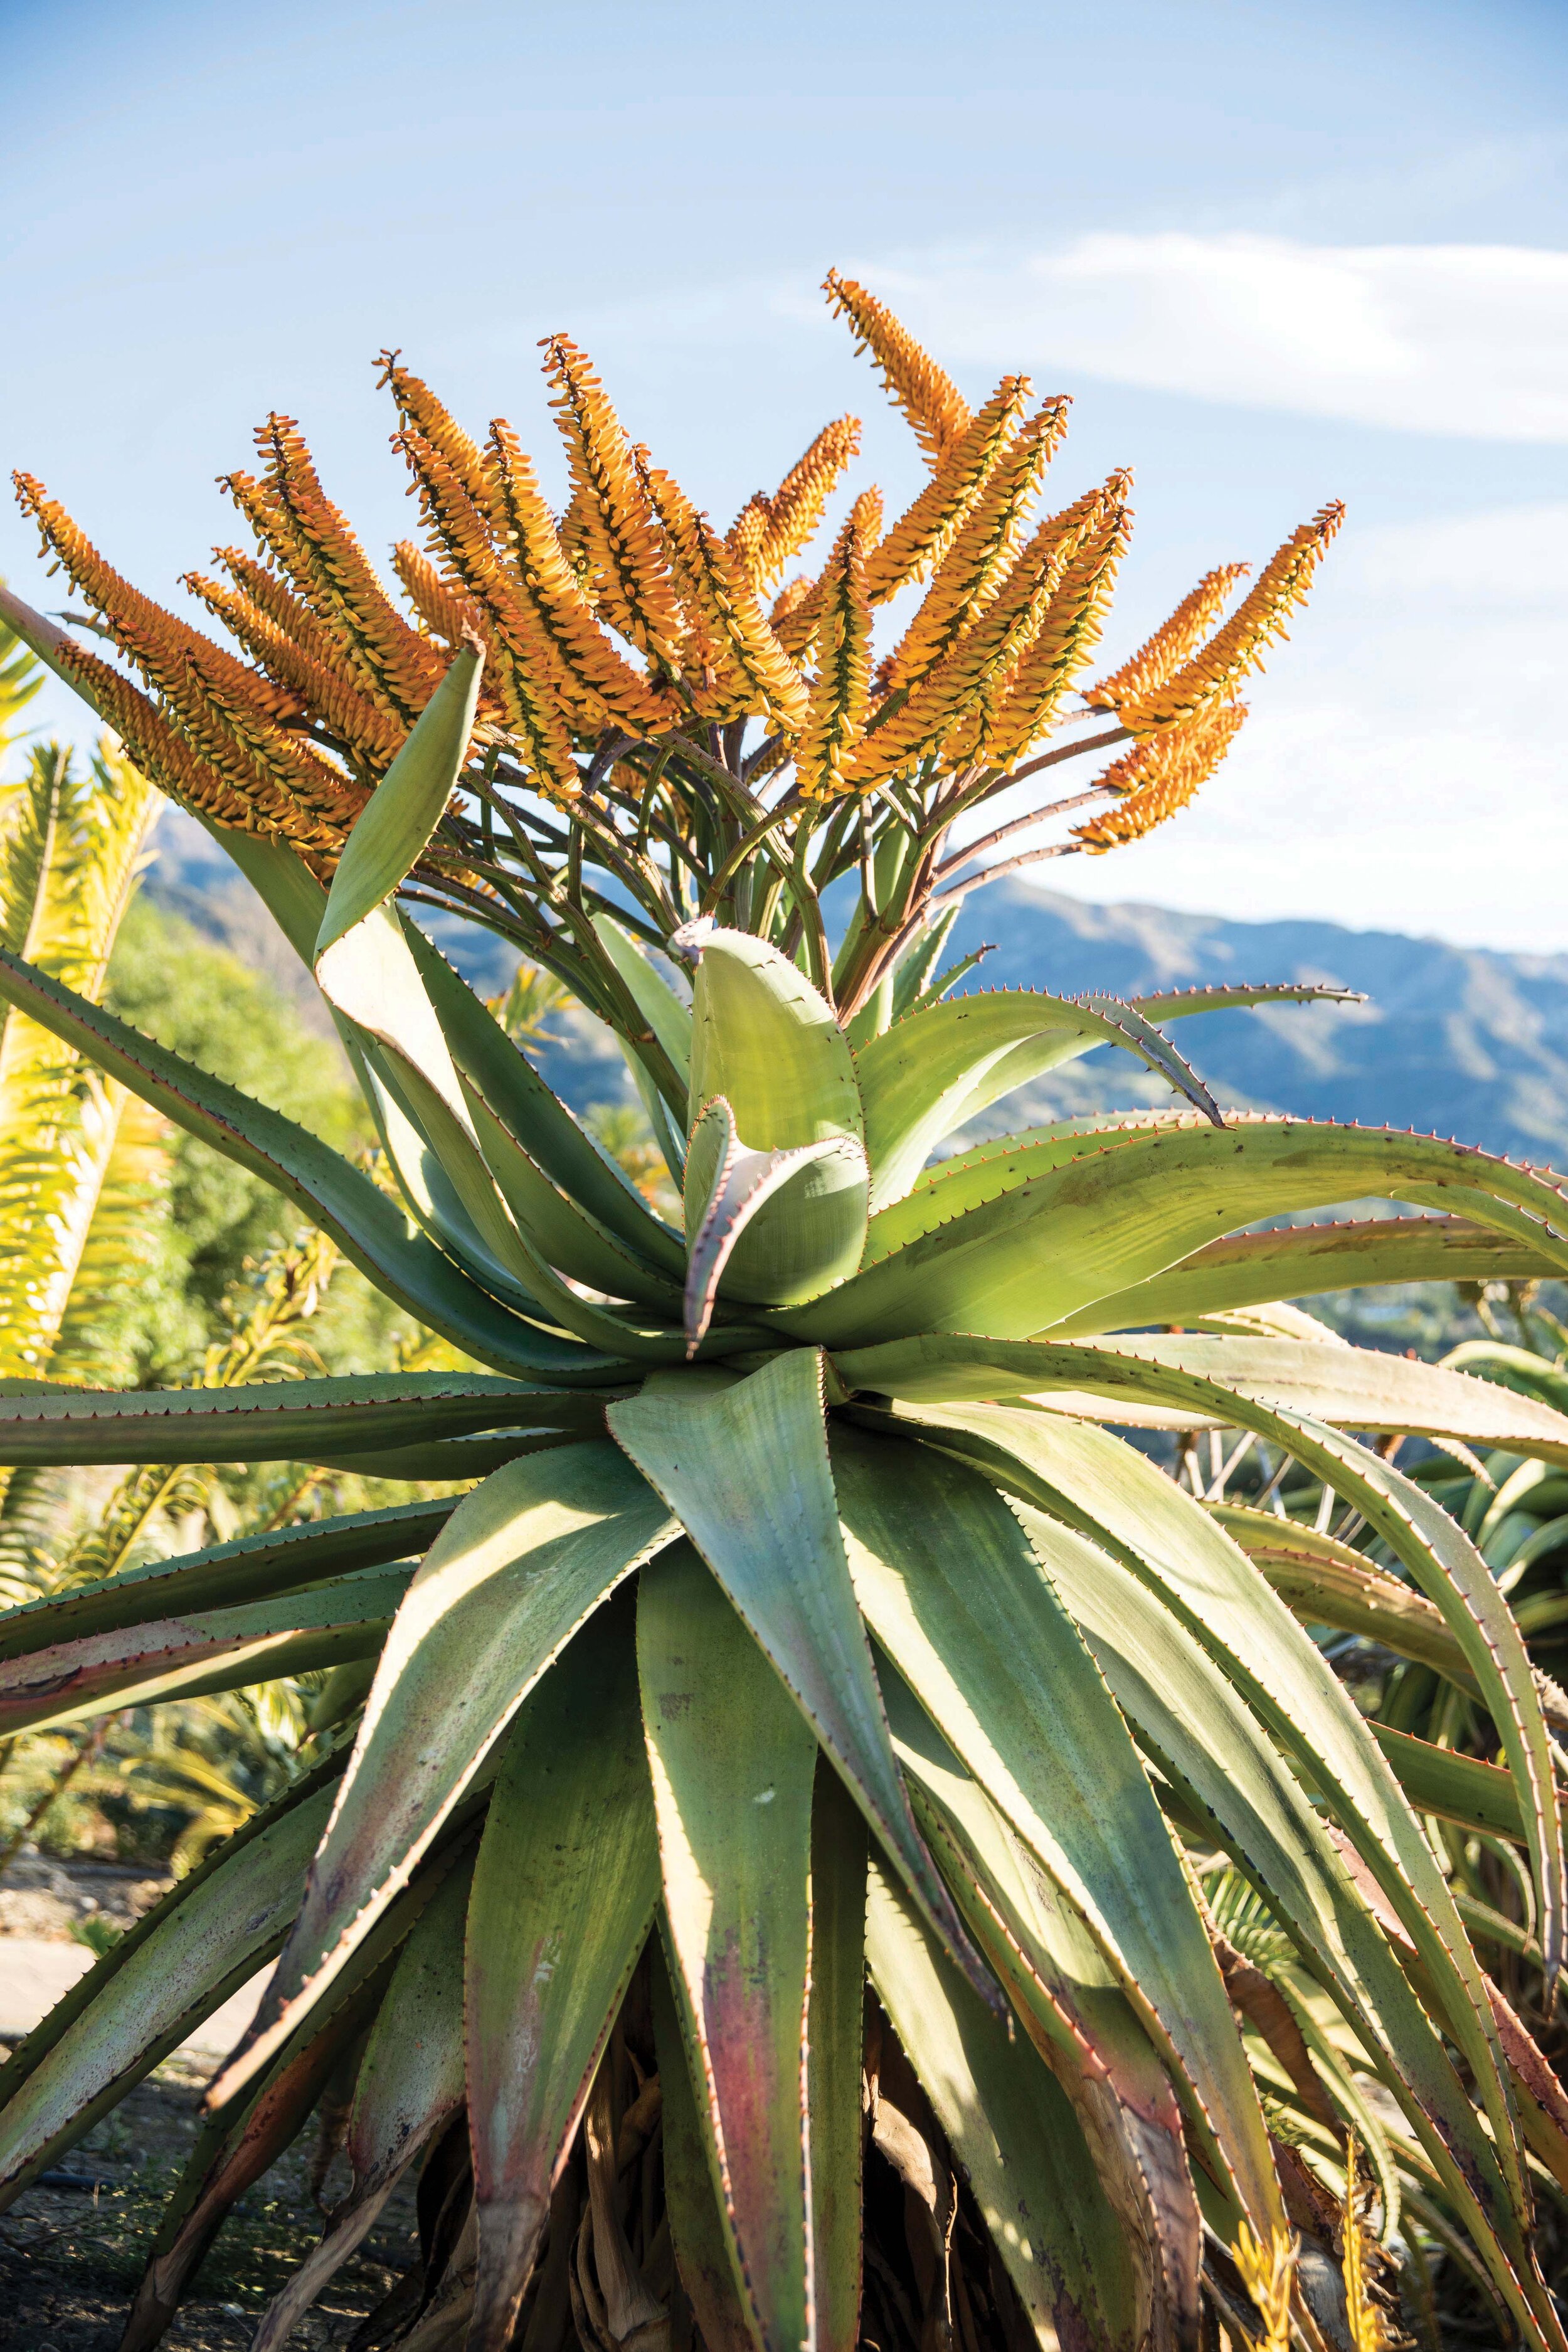  Winter-flowering Aloe marlothii is one of the most dramatic of aloes when in bloom.&nbsp; 